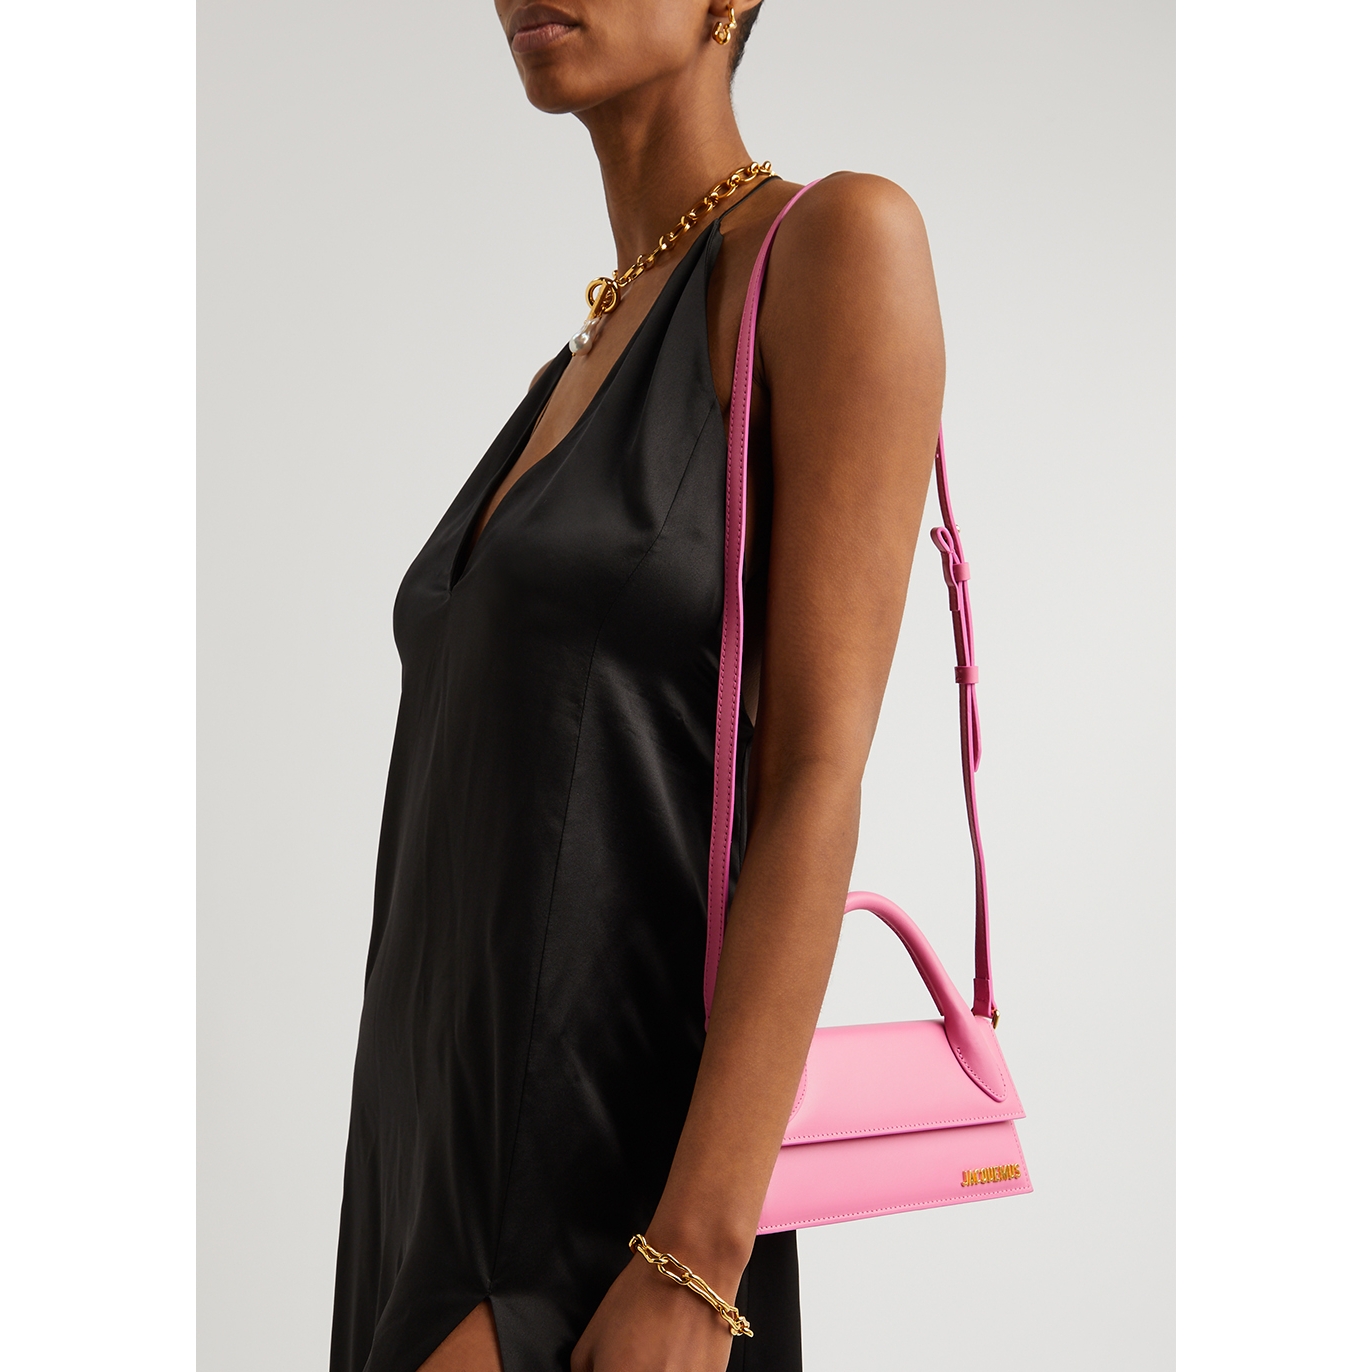 Jacquemus Le Chiquito Long Leather Top Handle Bag - Pink - Realry: A global  fashion sites aggregator